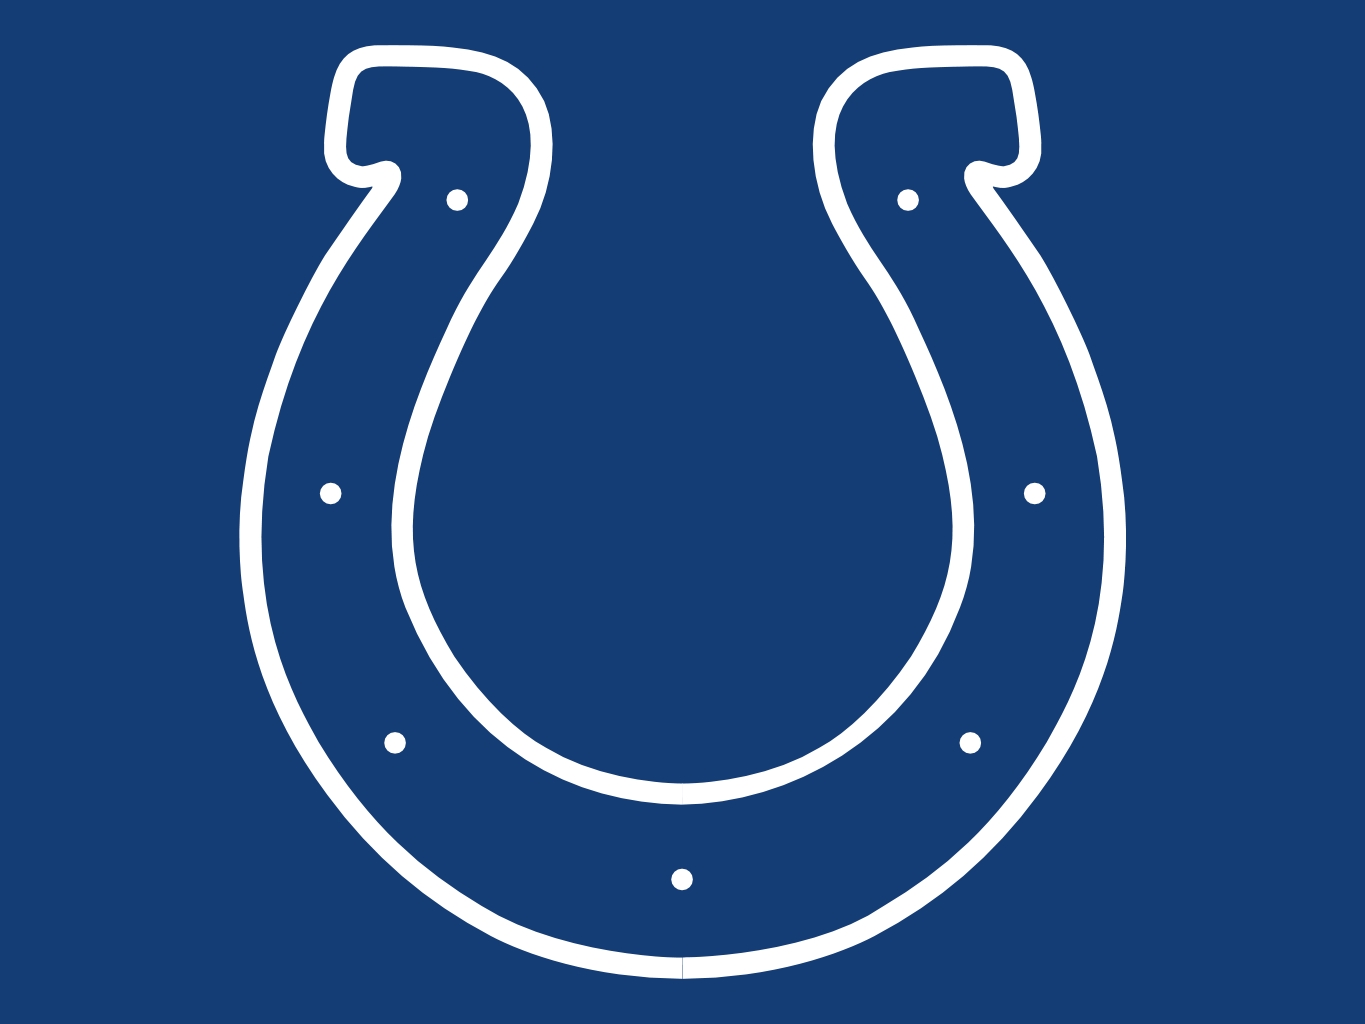 Go Colts!